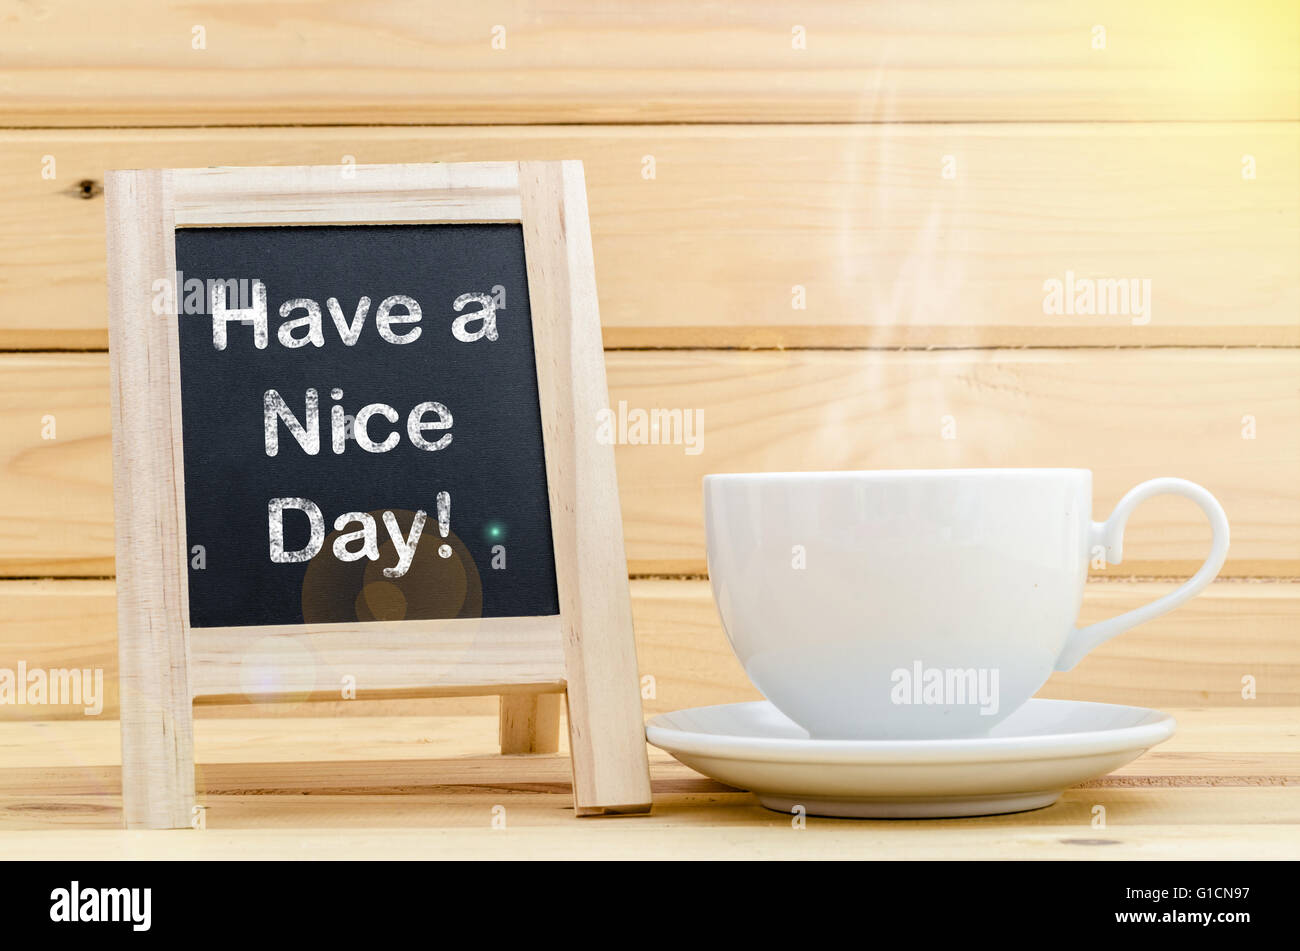 Have a nice day word on chalkboard and coffee in white cup with smoke. Day light. Stock Photo